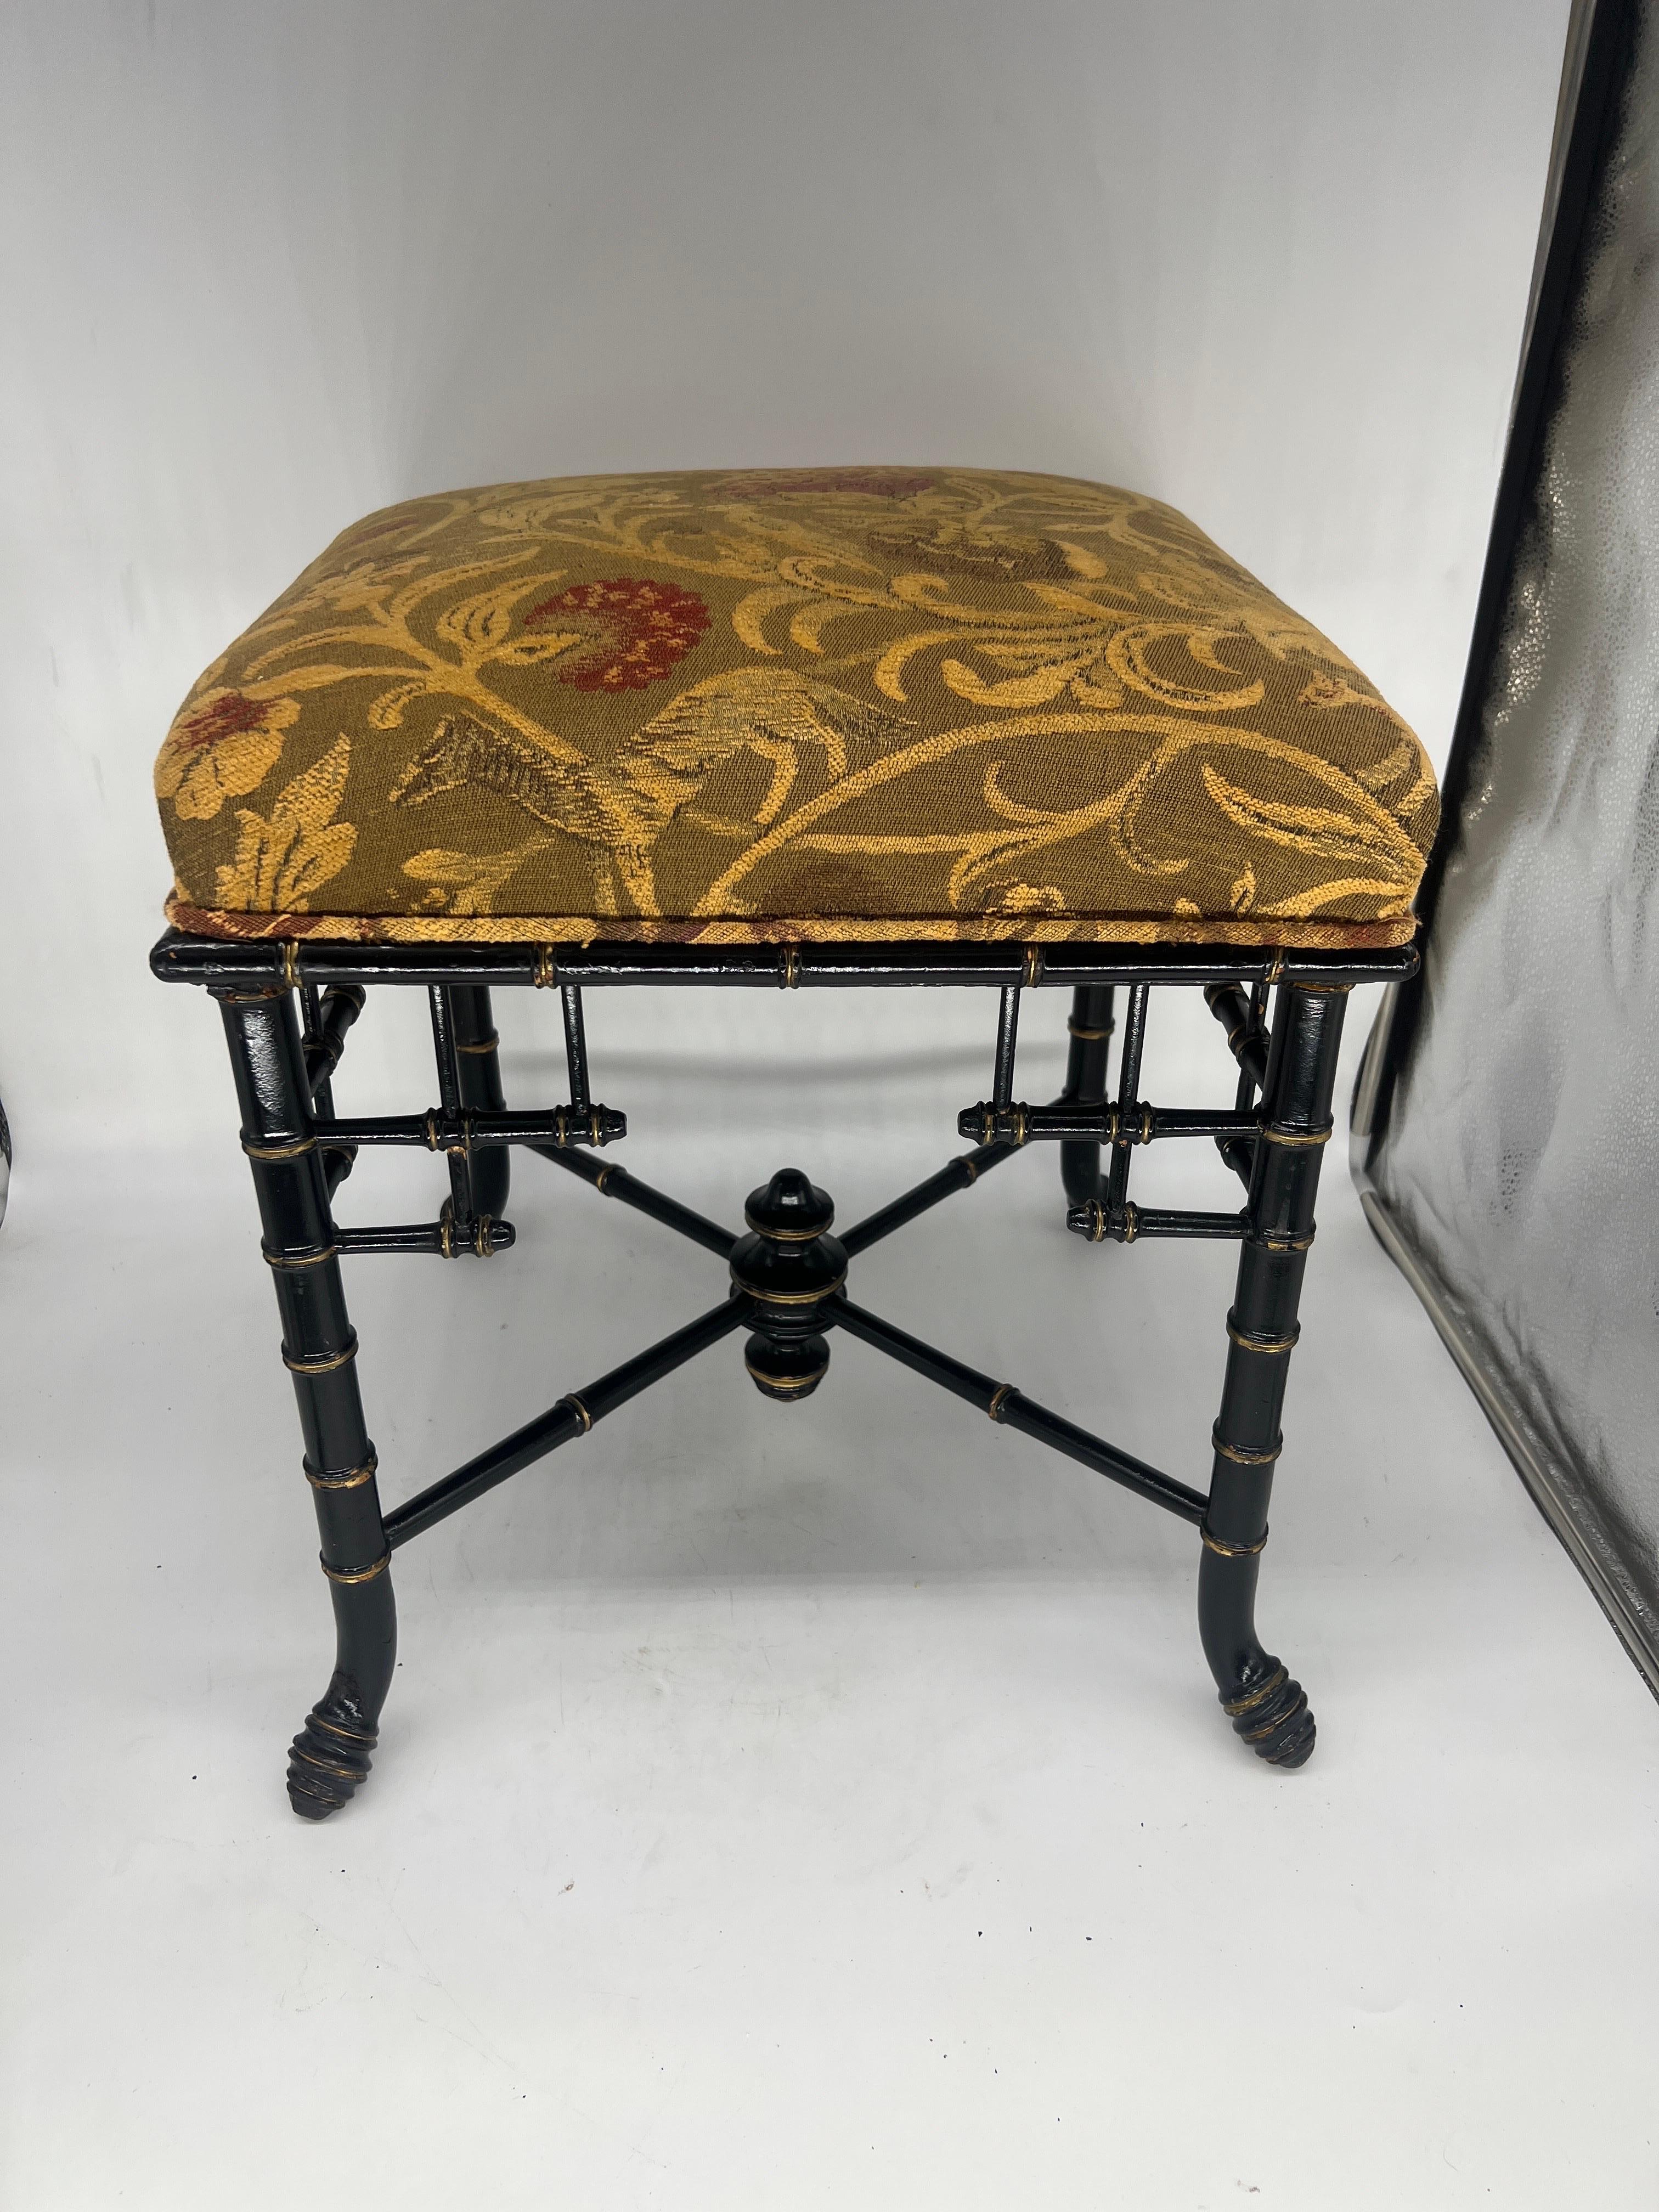 Exquisite Antique Aesthetic Movement Faux Bamboo Ottoman ATTR: Herter Brothers

*Please View Other Listings - Matching Side Chair and Piano Stool*

Presenting an exceptional piece of 19th-century design, this Antique Aesthetic Movement Faux Bamboo